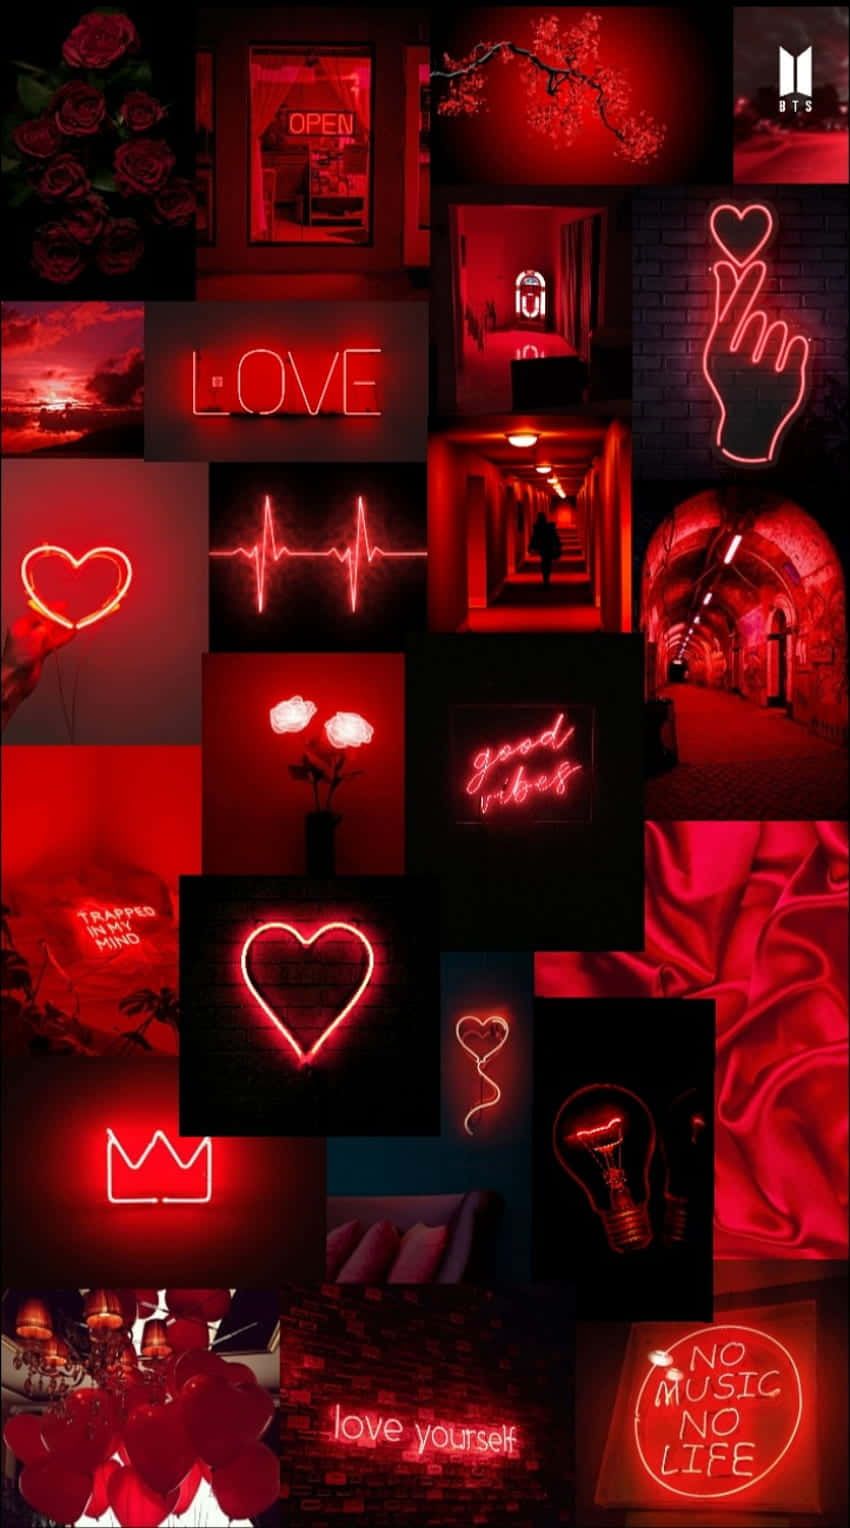 A collage of red neon lights and hearts - Red, light red, dark red, neon red